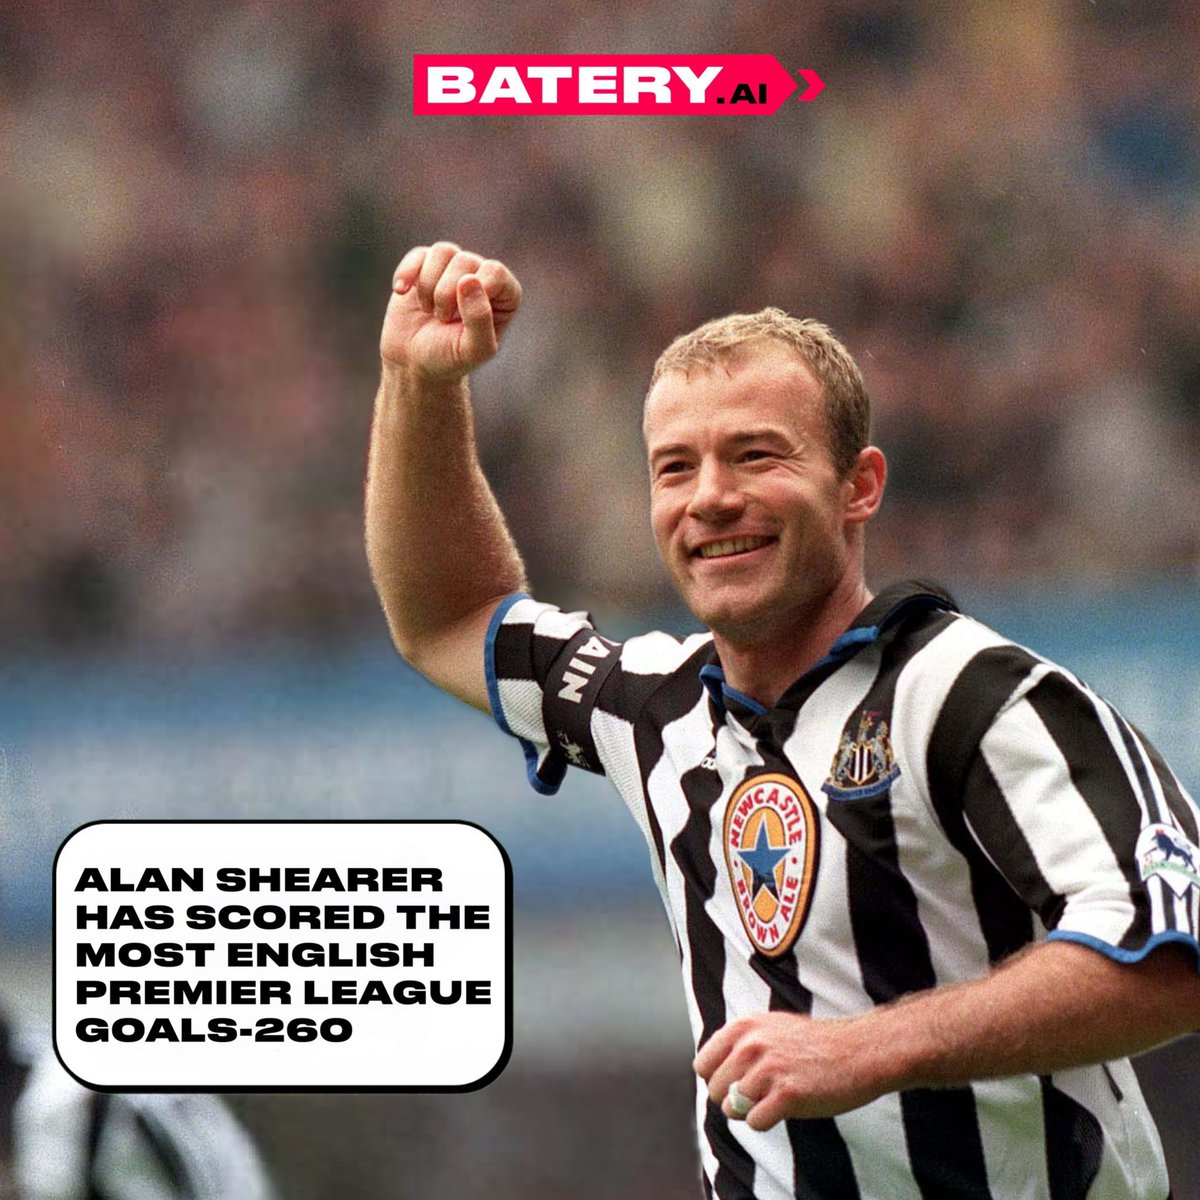 Alan Shearer has scored the most Premier League goals ⚽️ Shearer scored 260 goals in the Premier League. Wayne Rooney scored the second most with 208 goals 🚀